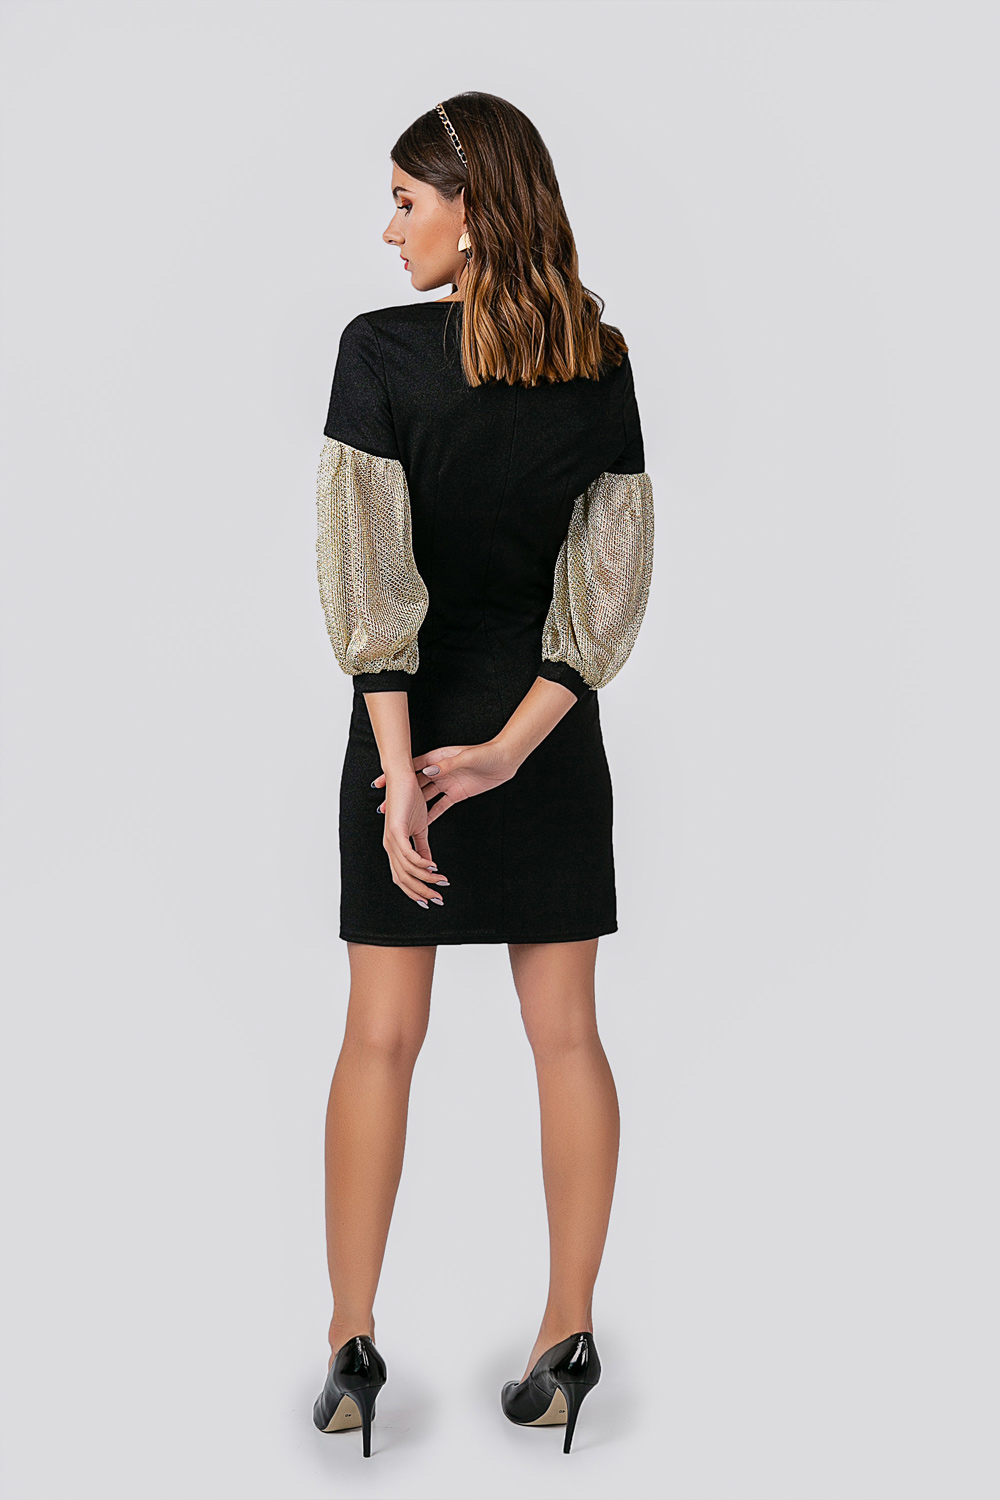 Dress with gold sleeves